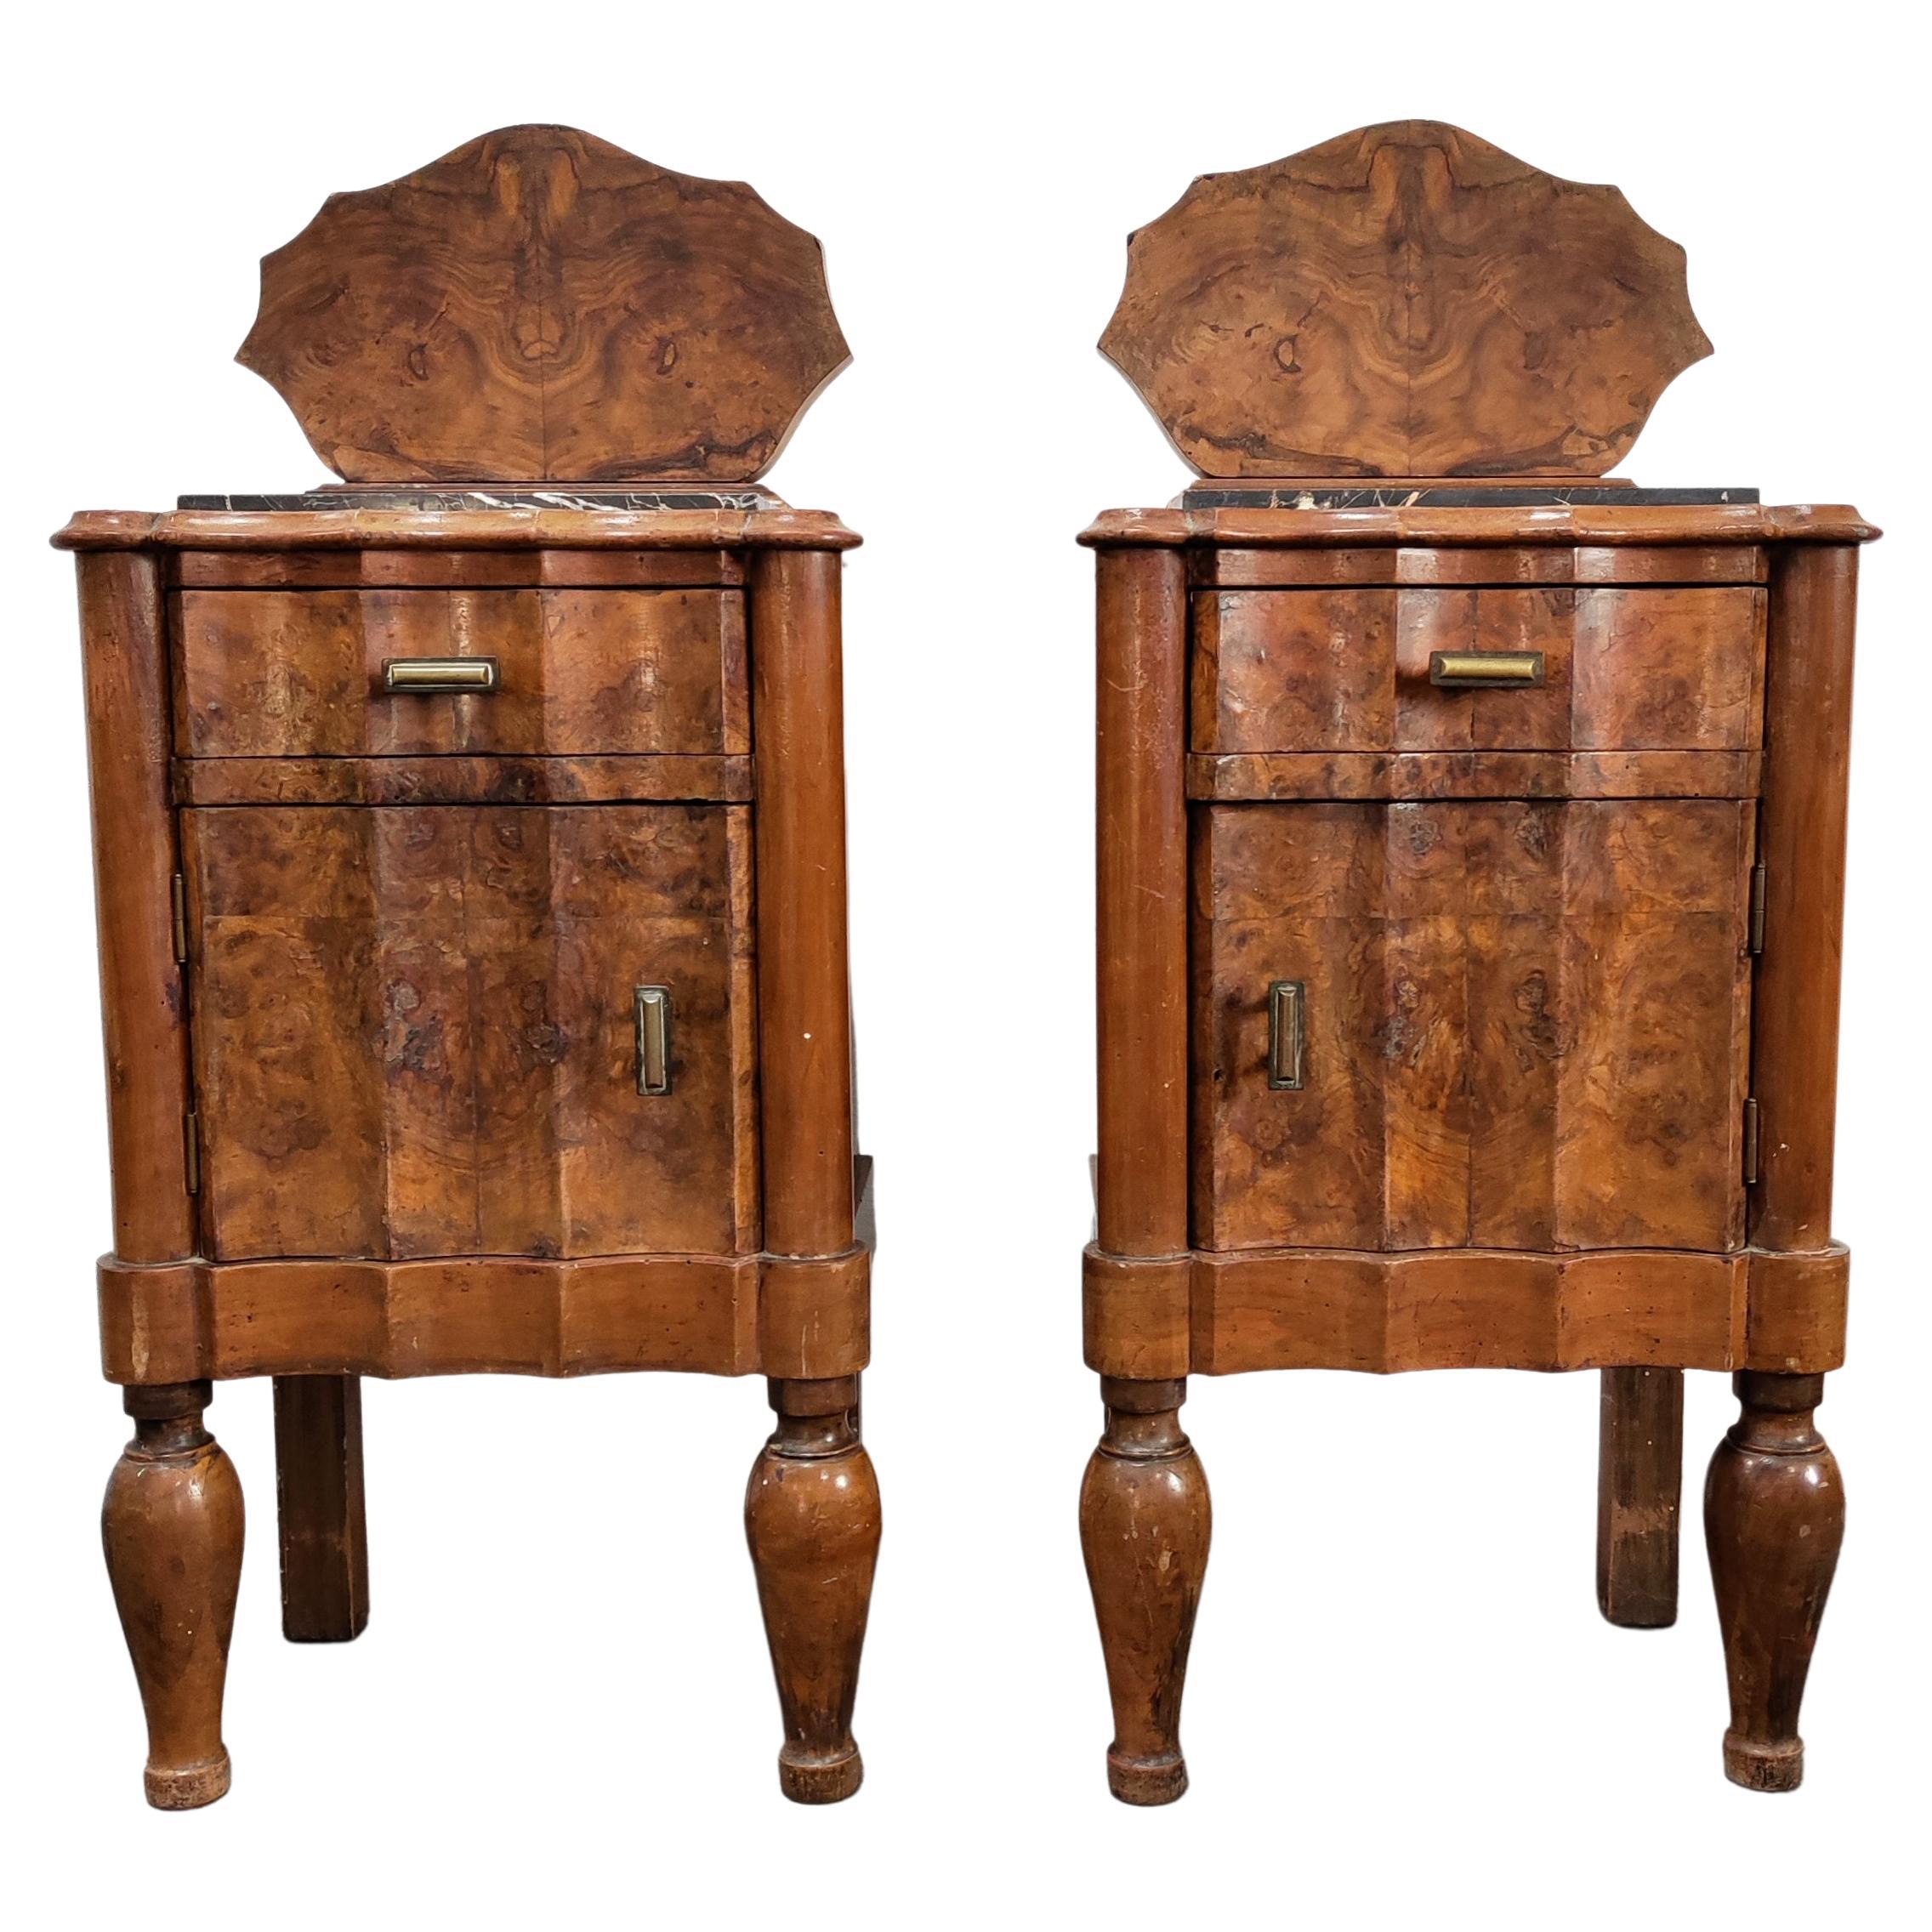 Pair of Pettite Art Deco Nightstands in Walnut Burl and Marble, Italy, 1920s For Sale